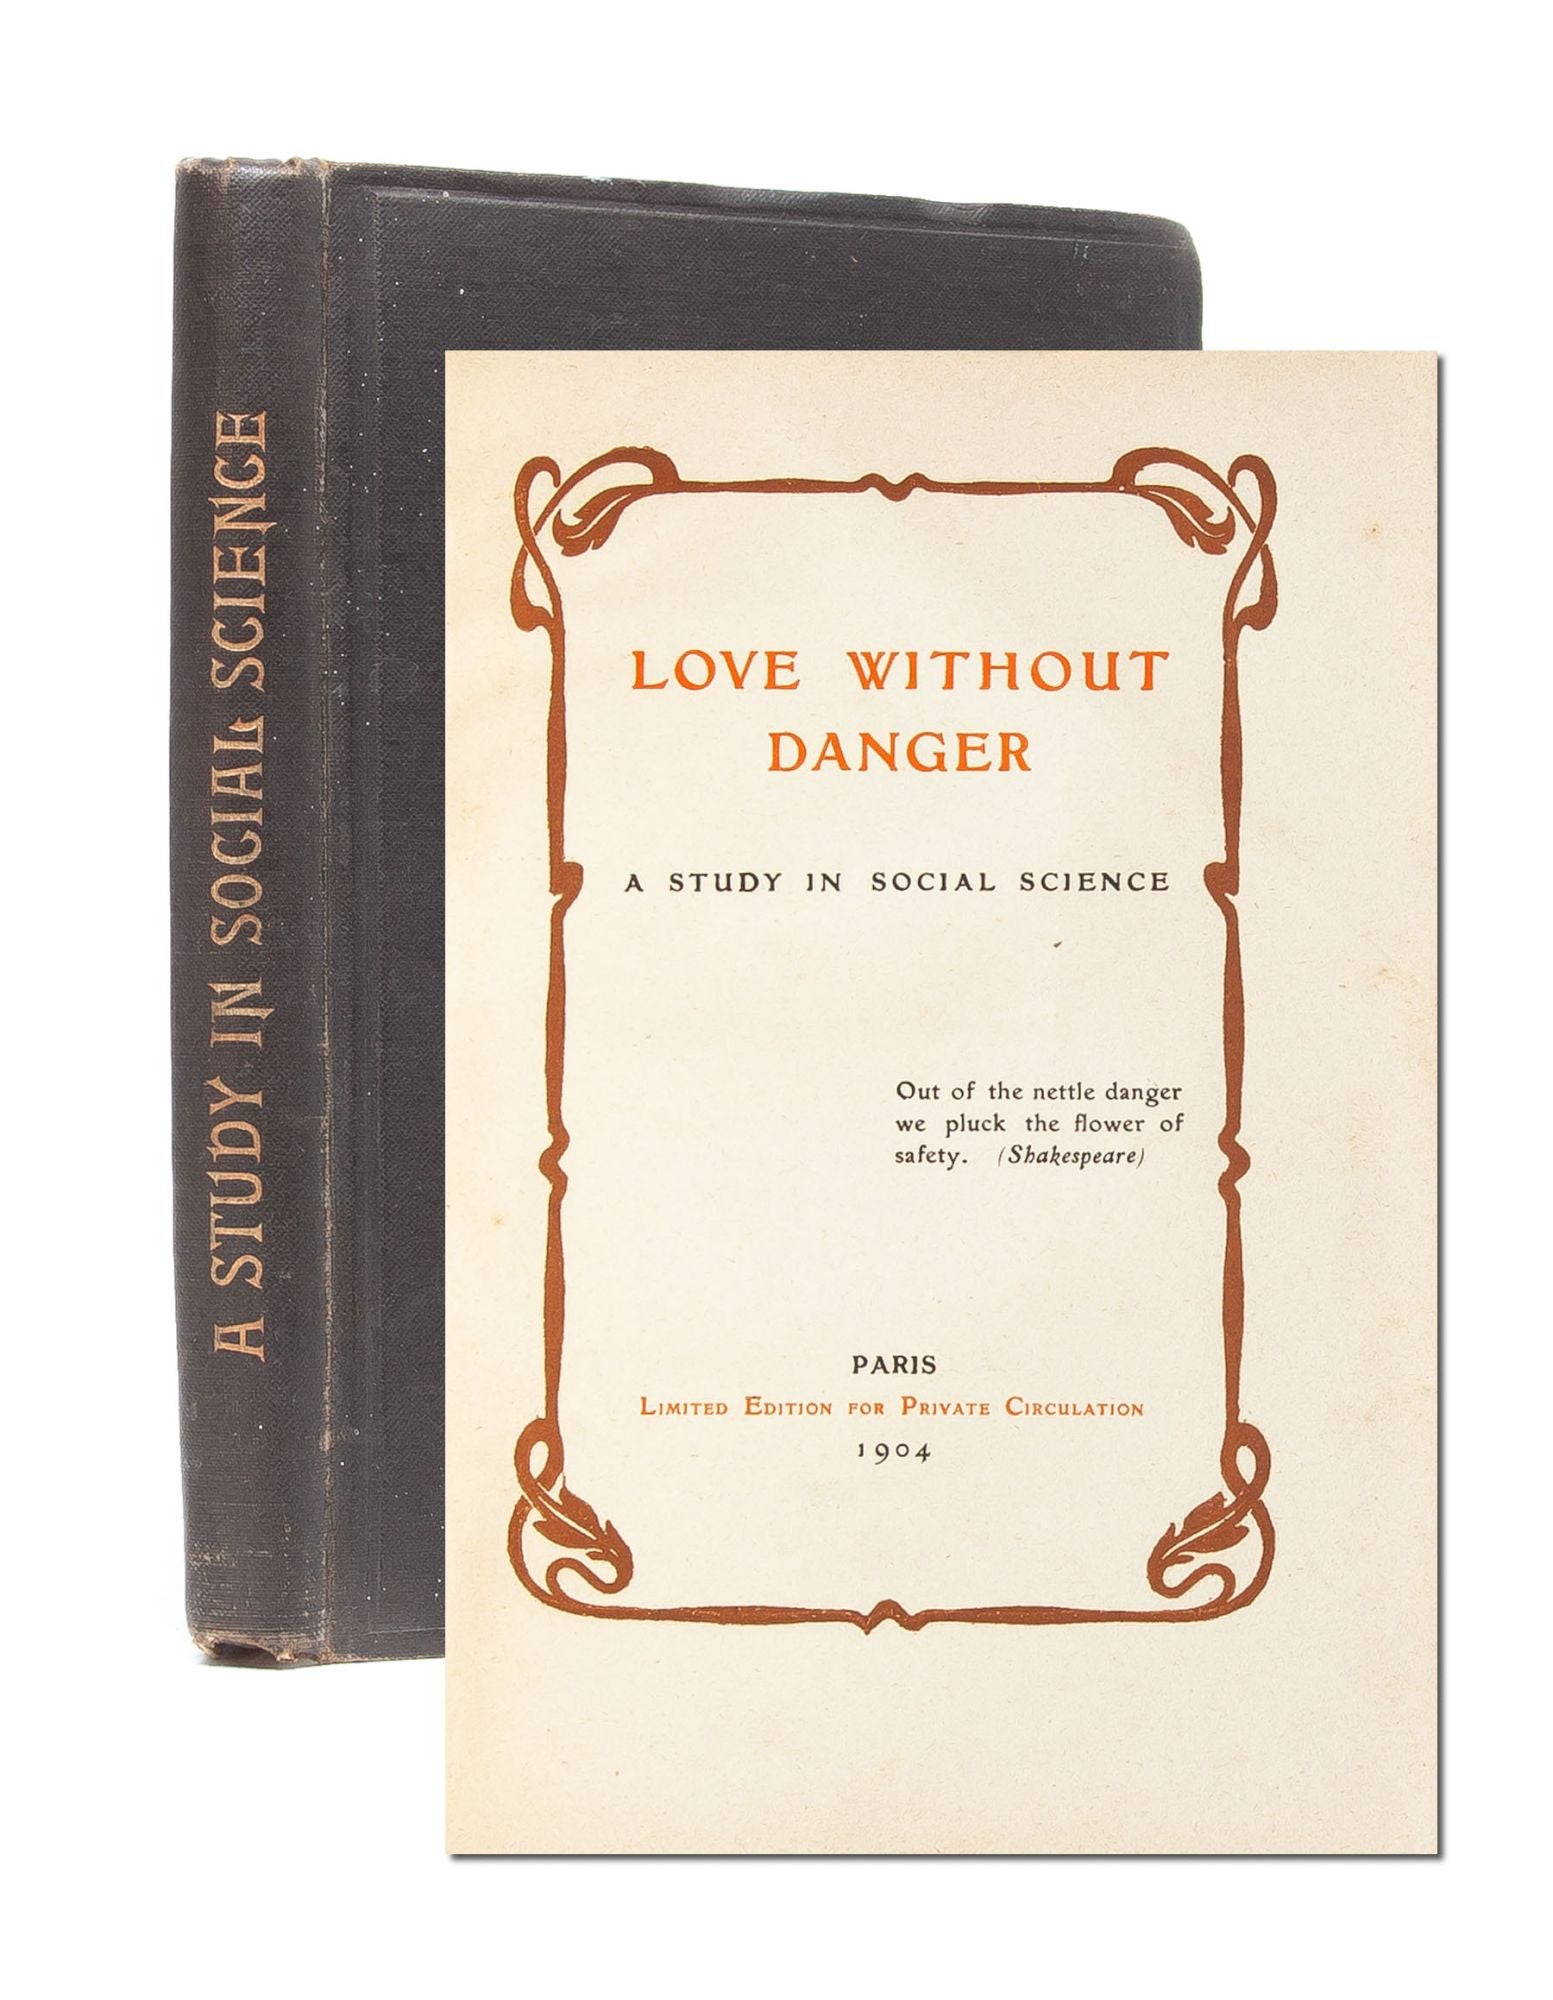 (Item #5202) Love Without Danger. A Study of Social Science. Erotic Literature, Anonymous, Contraception.